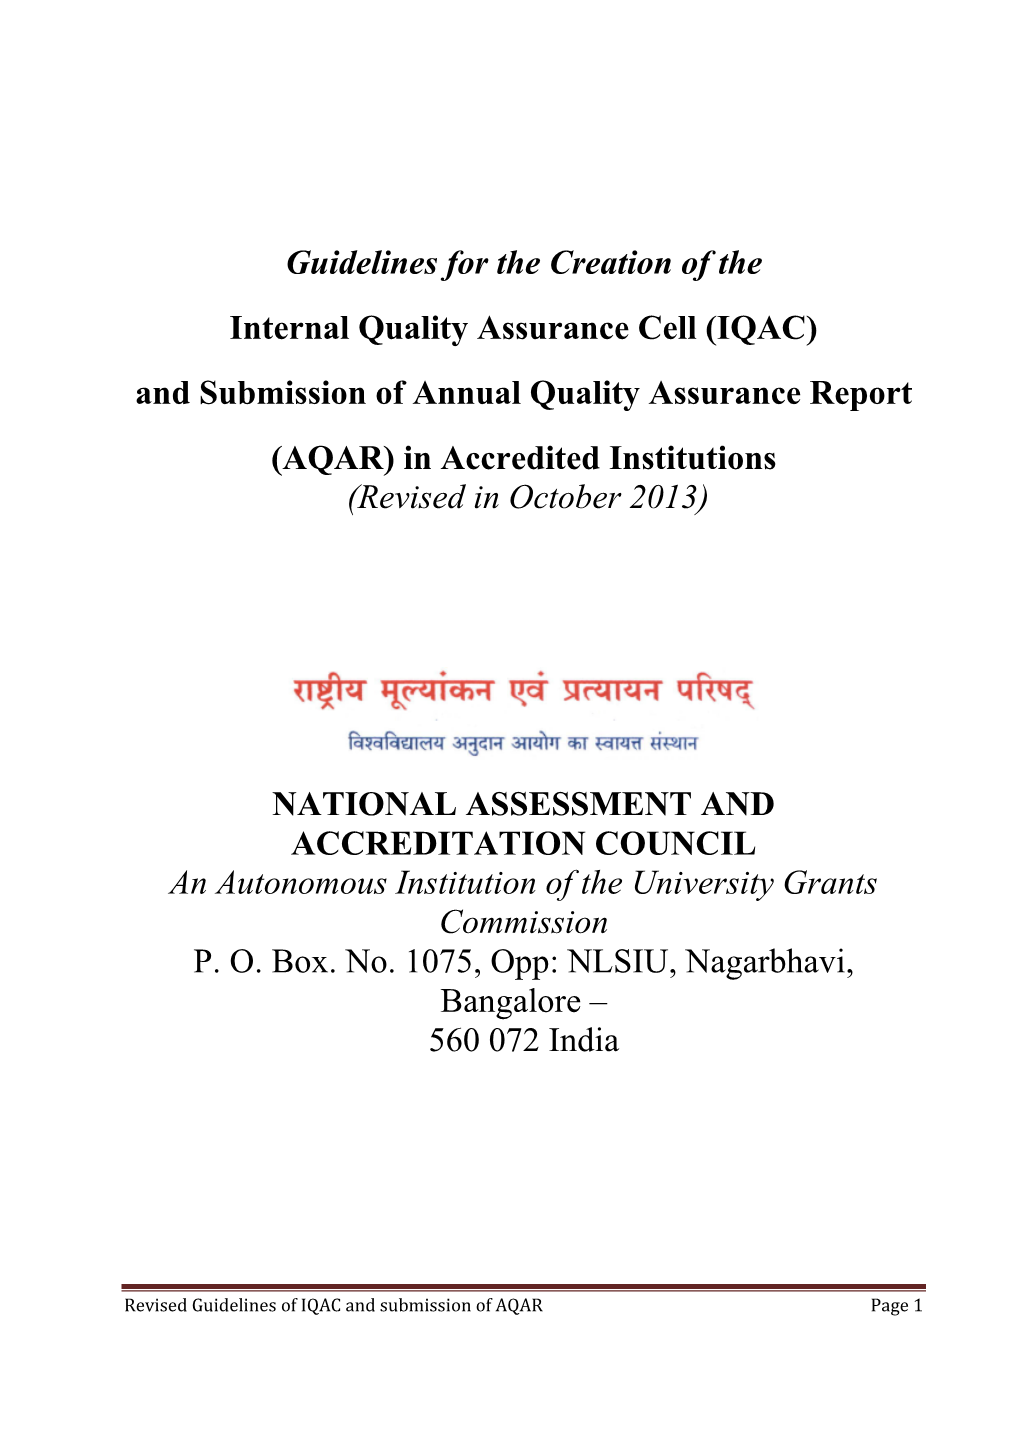 IQAC) and Submission of Annual Quality Assurance Report (AQAR) in Accredited Institutions (Revised in October 2013